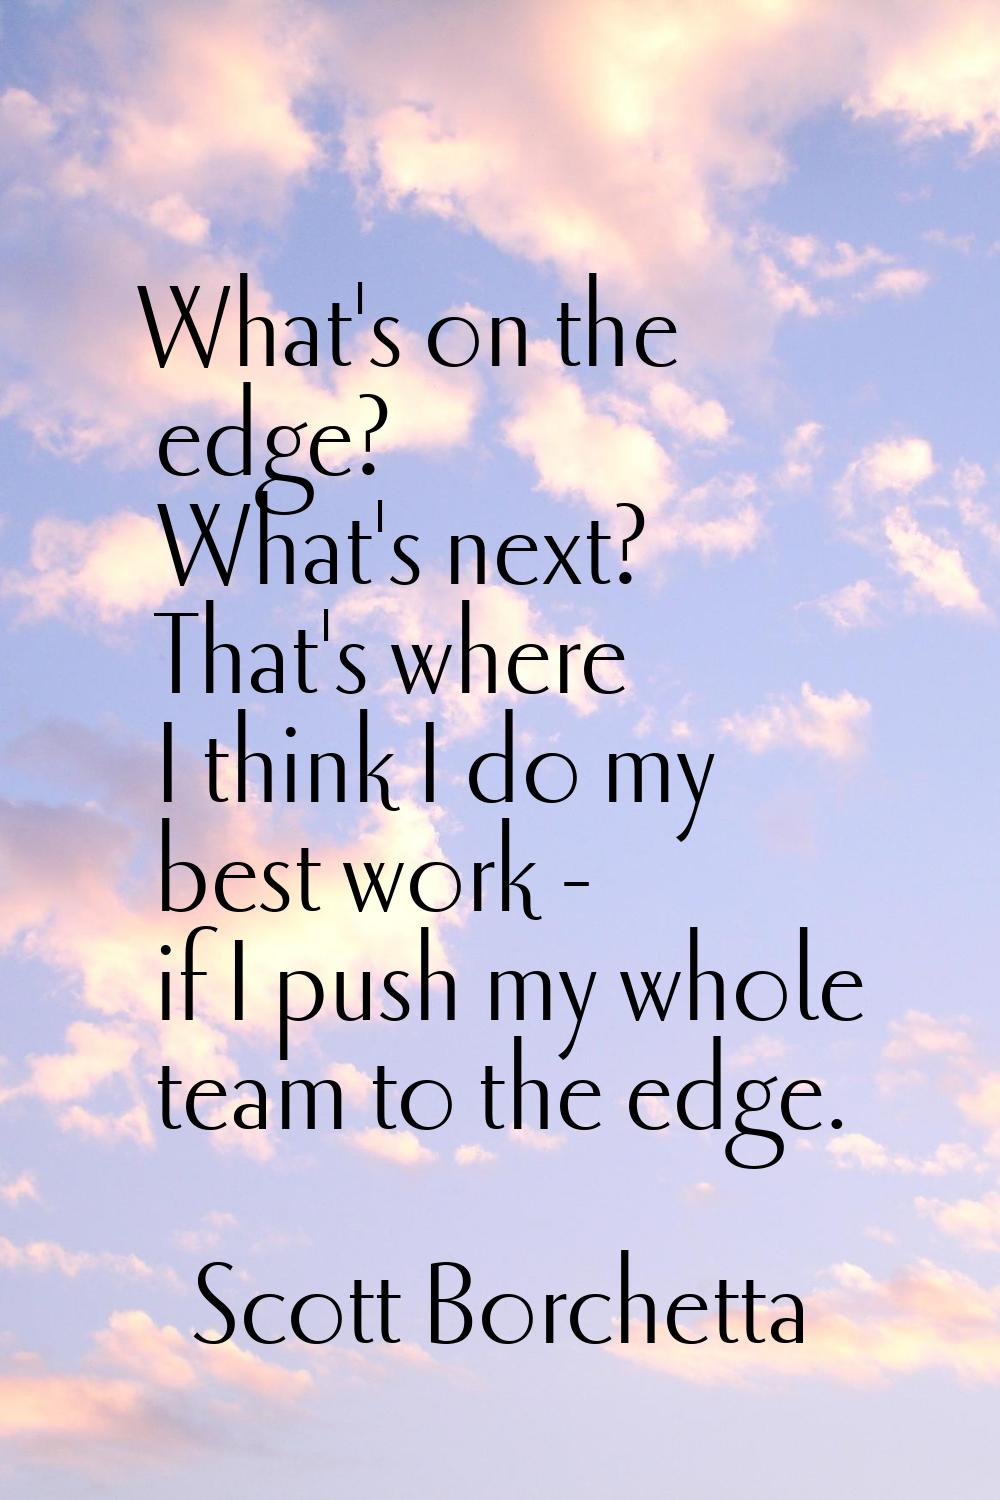 What's on the edge? What's next? That's where I think I do my best work - if I push my whole team t